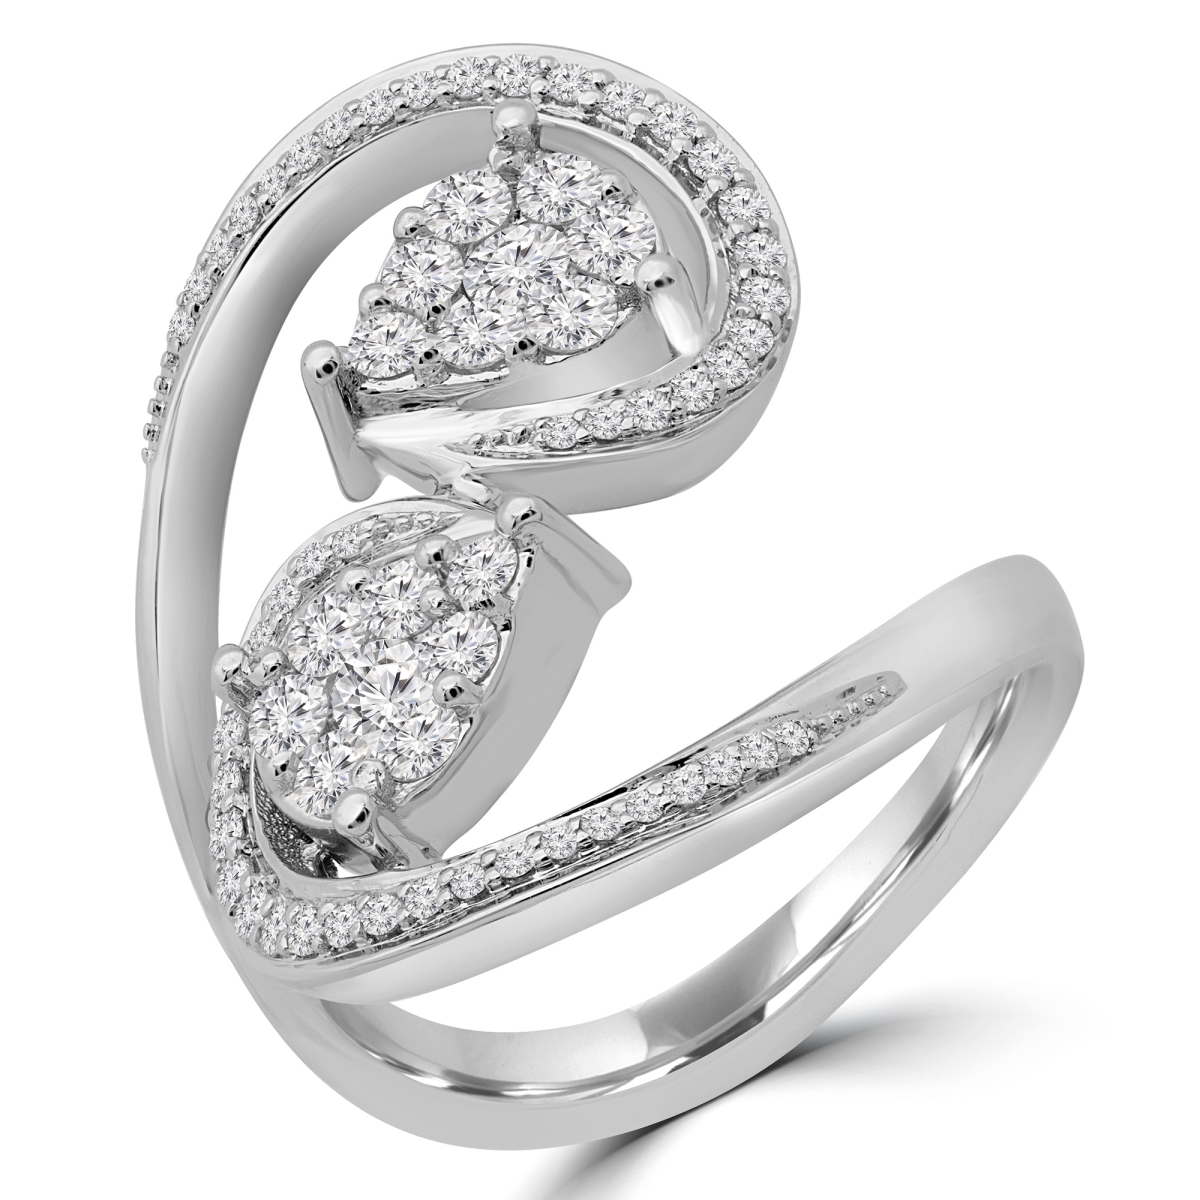 Picture of Majesty Diamonds MDR190070-3 0.67 CTW Round Diamond Swirl Pear Cluster Ring in 14K White Gold - Size 3